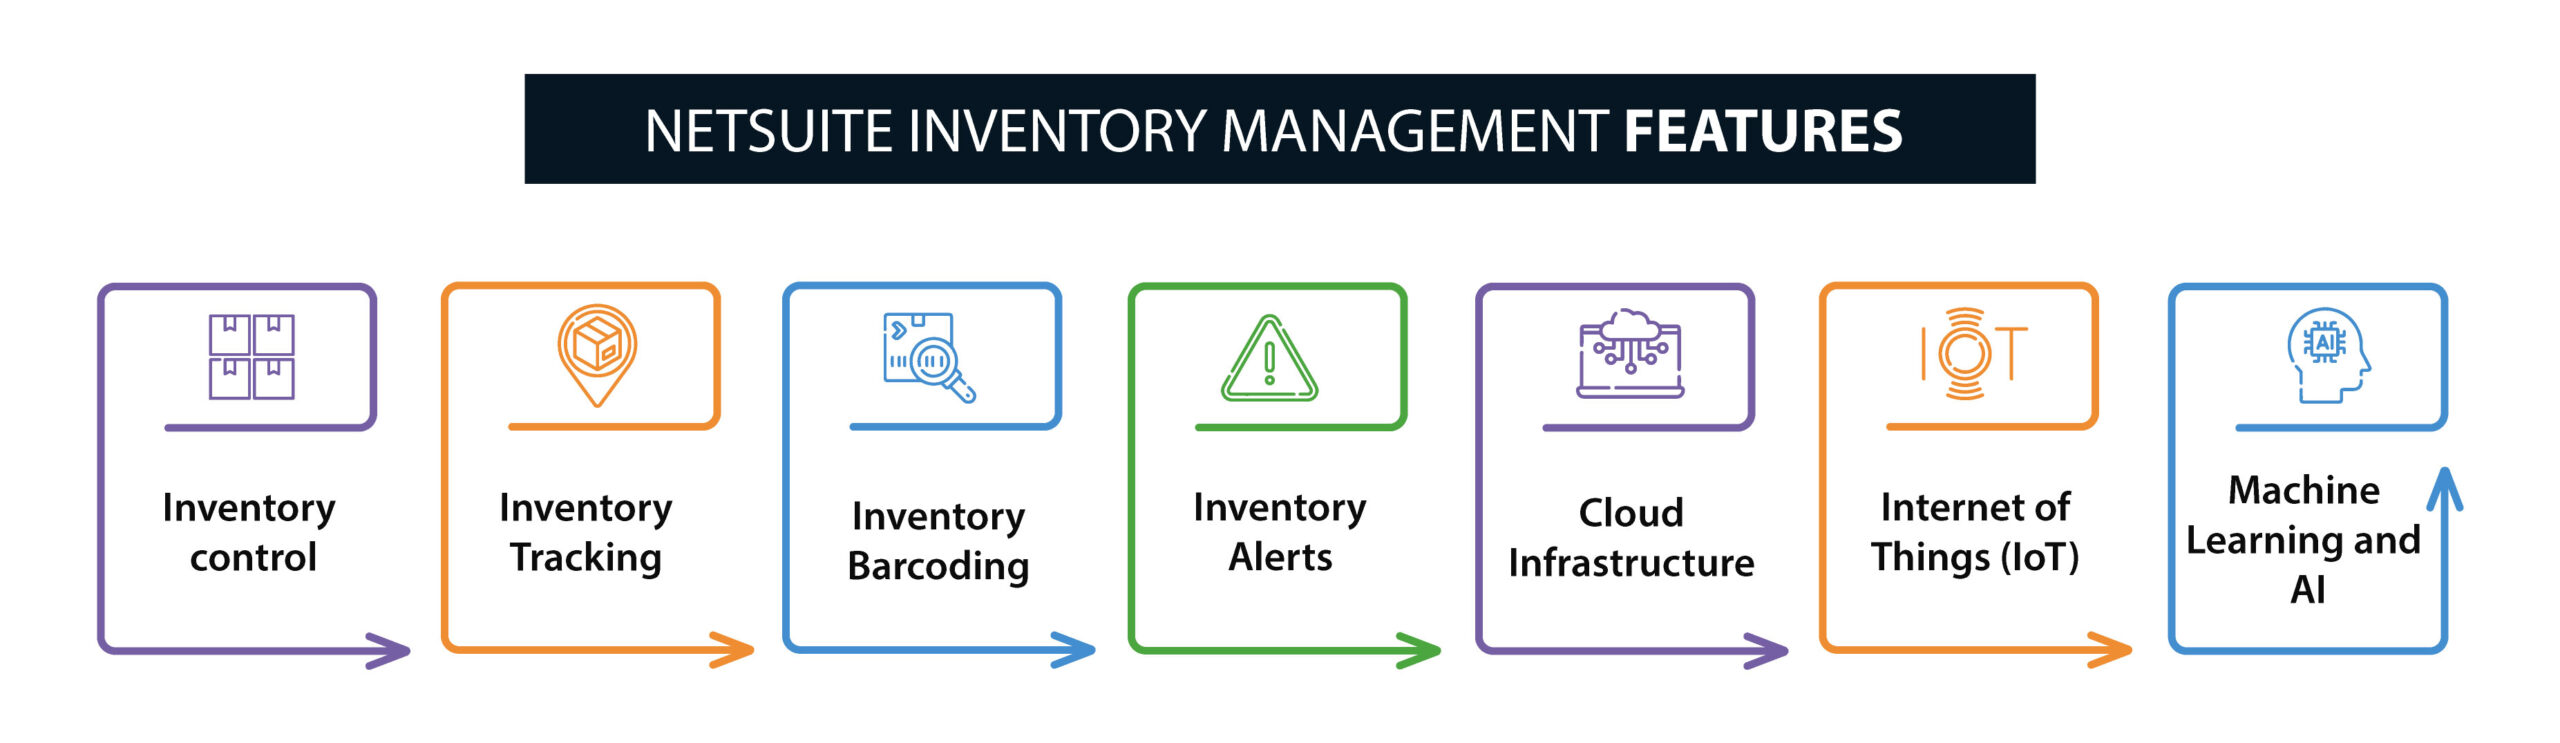 NetSuite Inventory Management Features